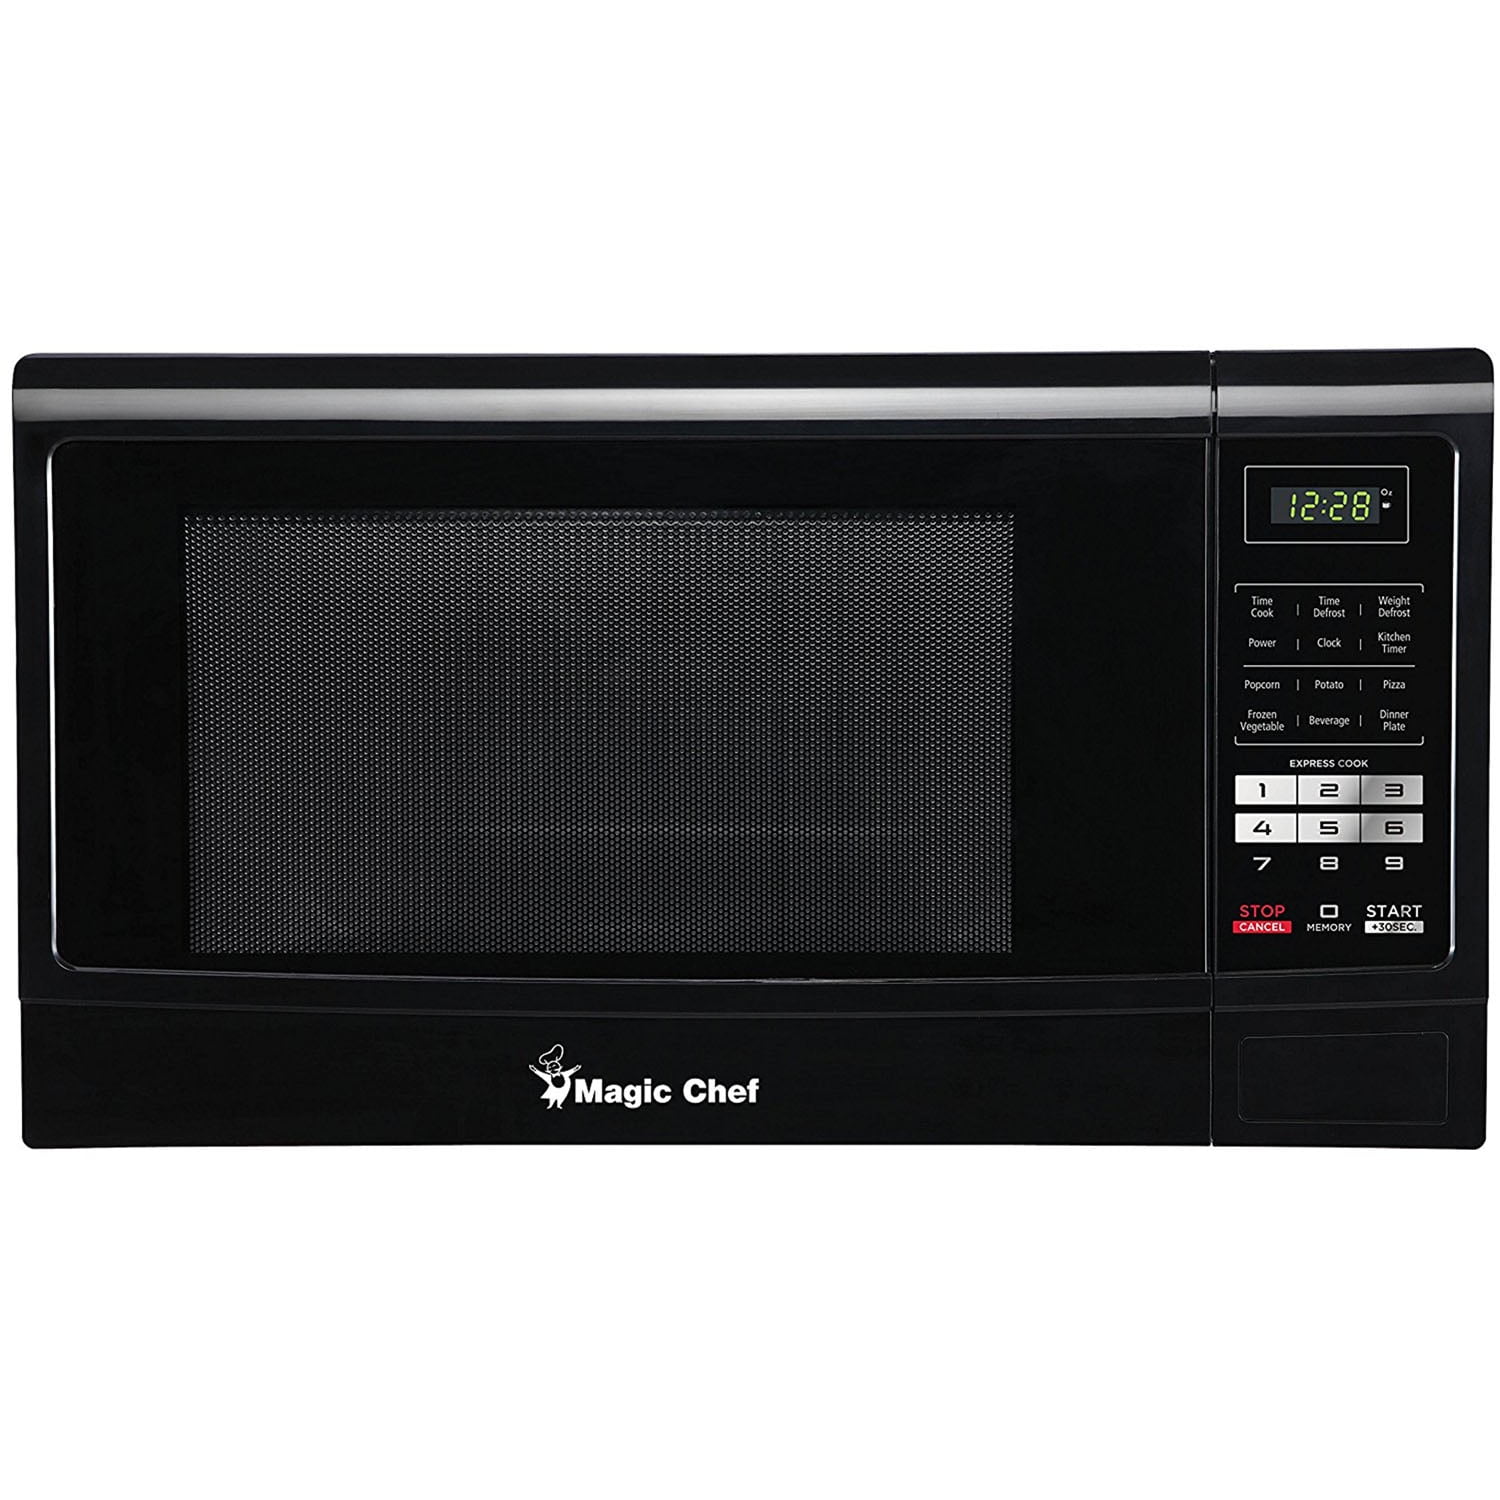 Magic Chef 1 6 Cu Ft 1100w Countertop Microwave Oven With Push Button